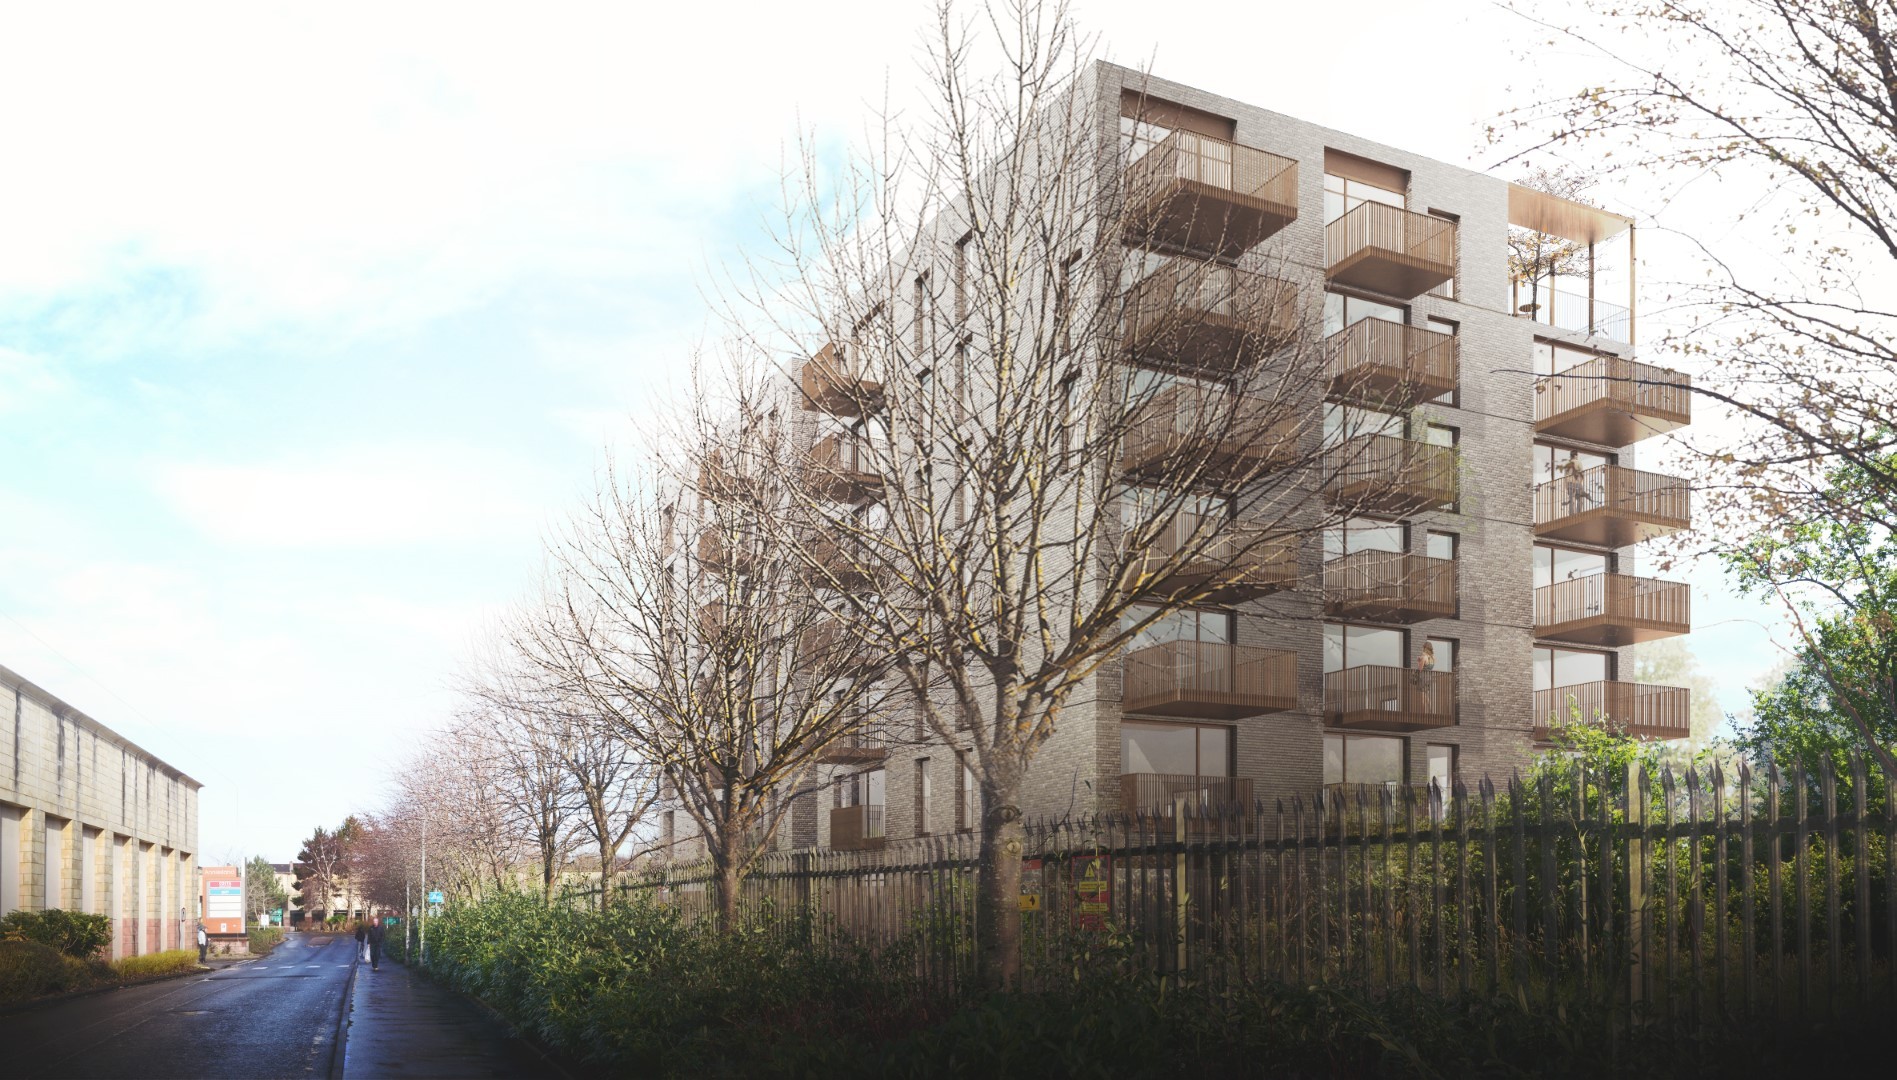 Reduced build to rent plans submitted for Anniesland